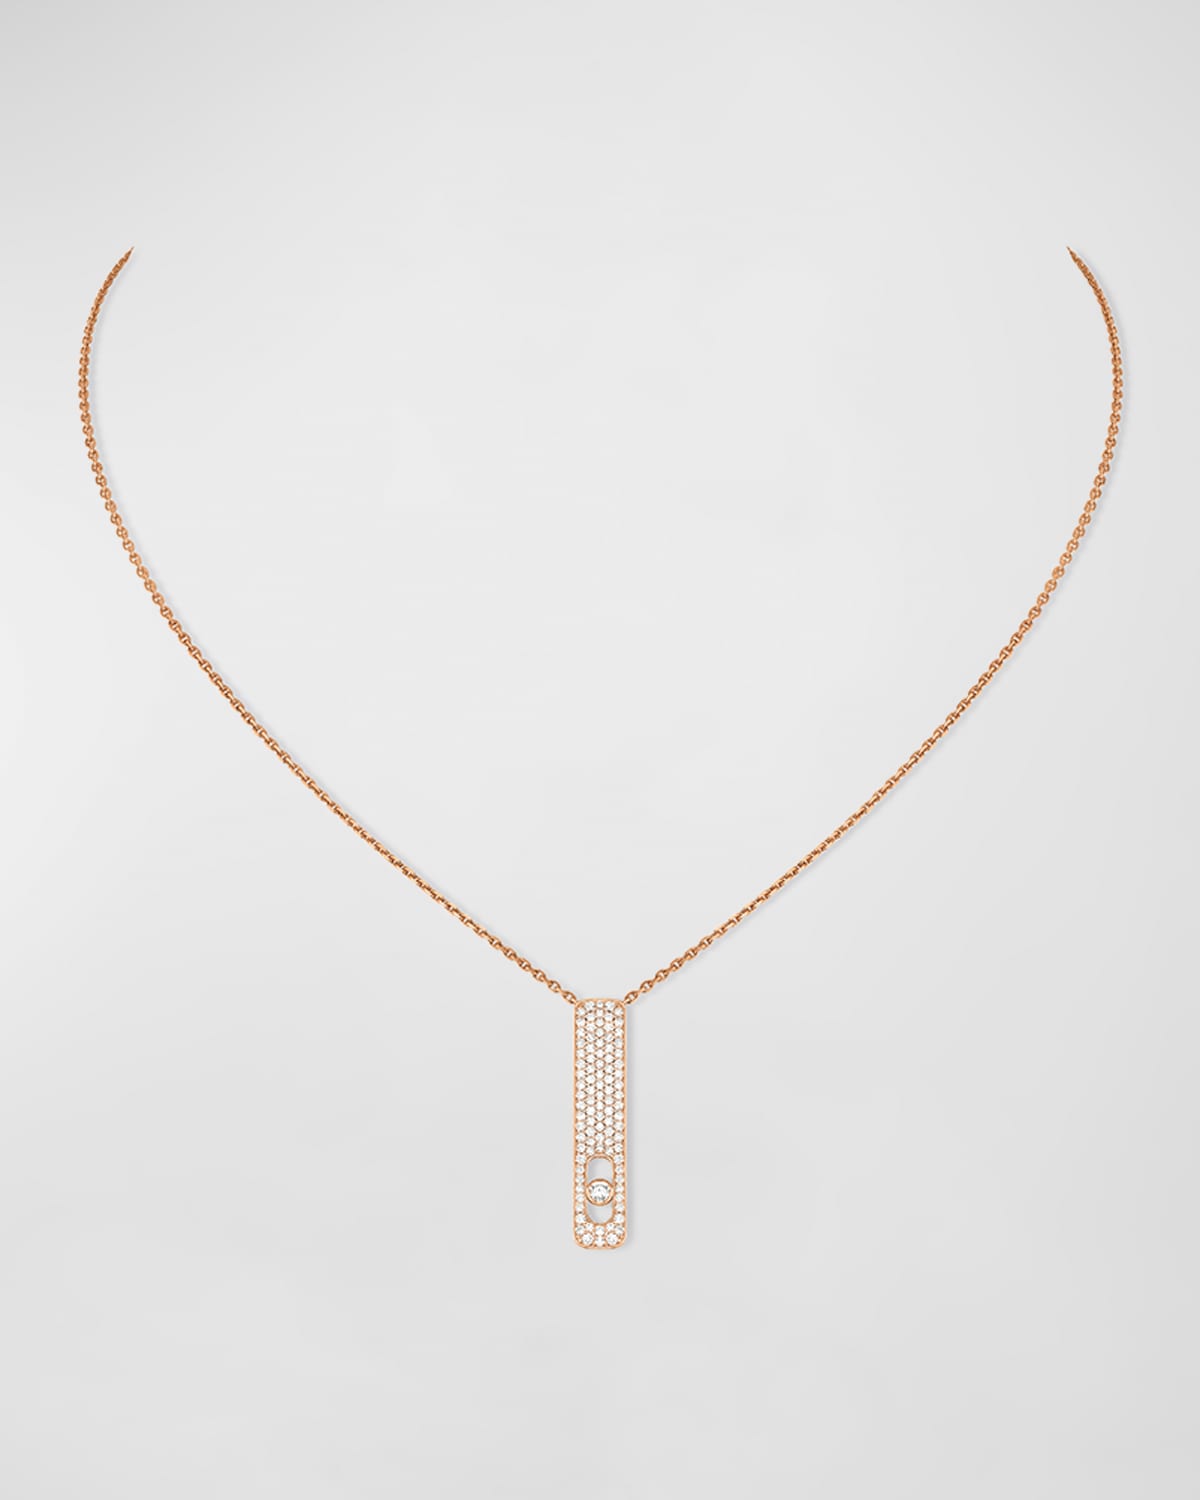 Messika My First Diamond 18K Rose Gold Pave Pendant Necklace, 45cm